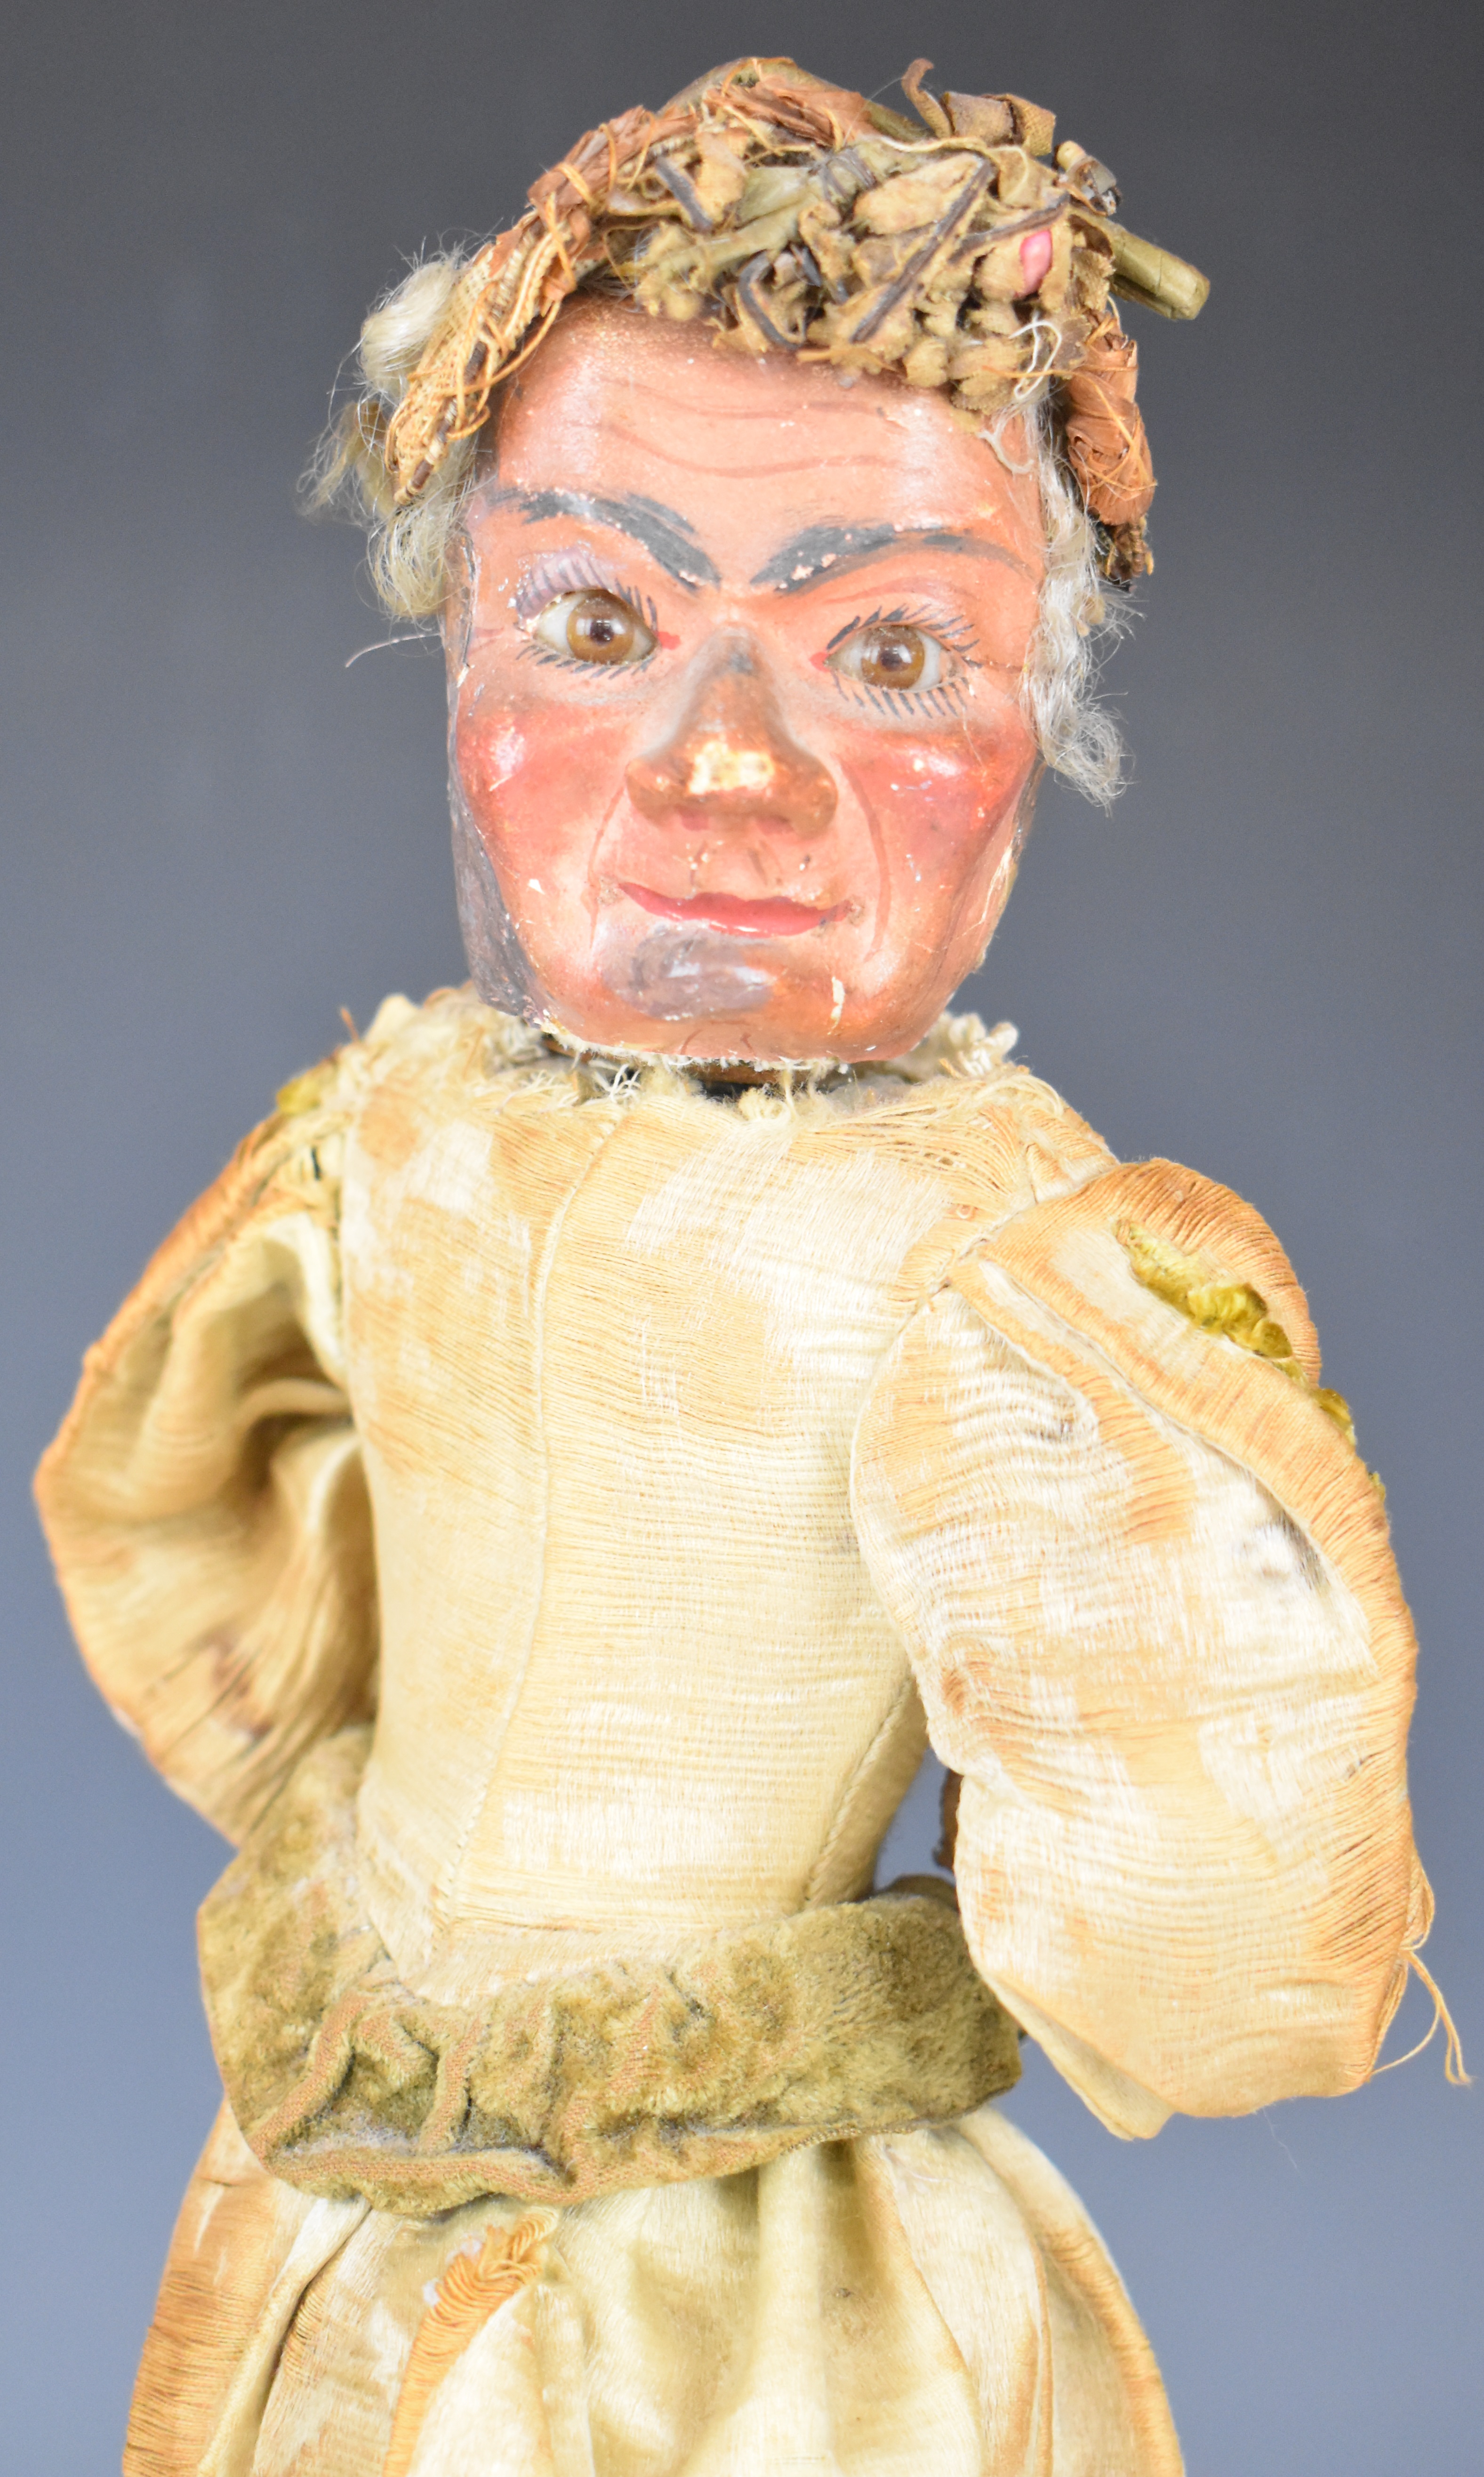 19th century likely French Renou automaton model of a doll, with bisque or similar face and lower - Image 4 of 12